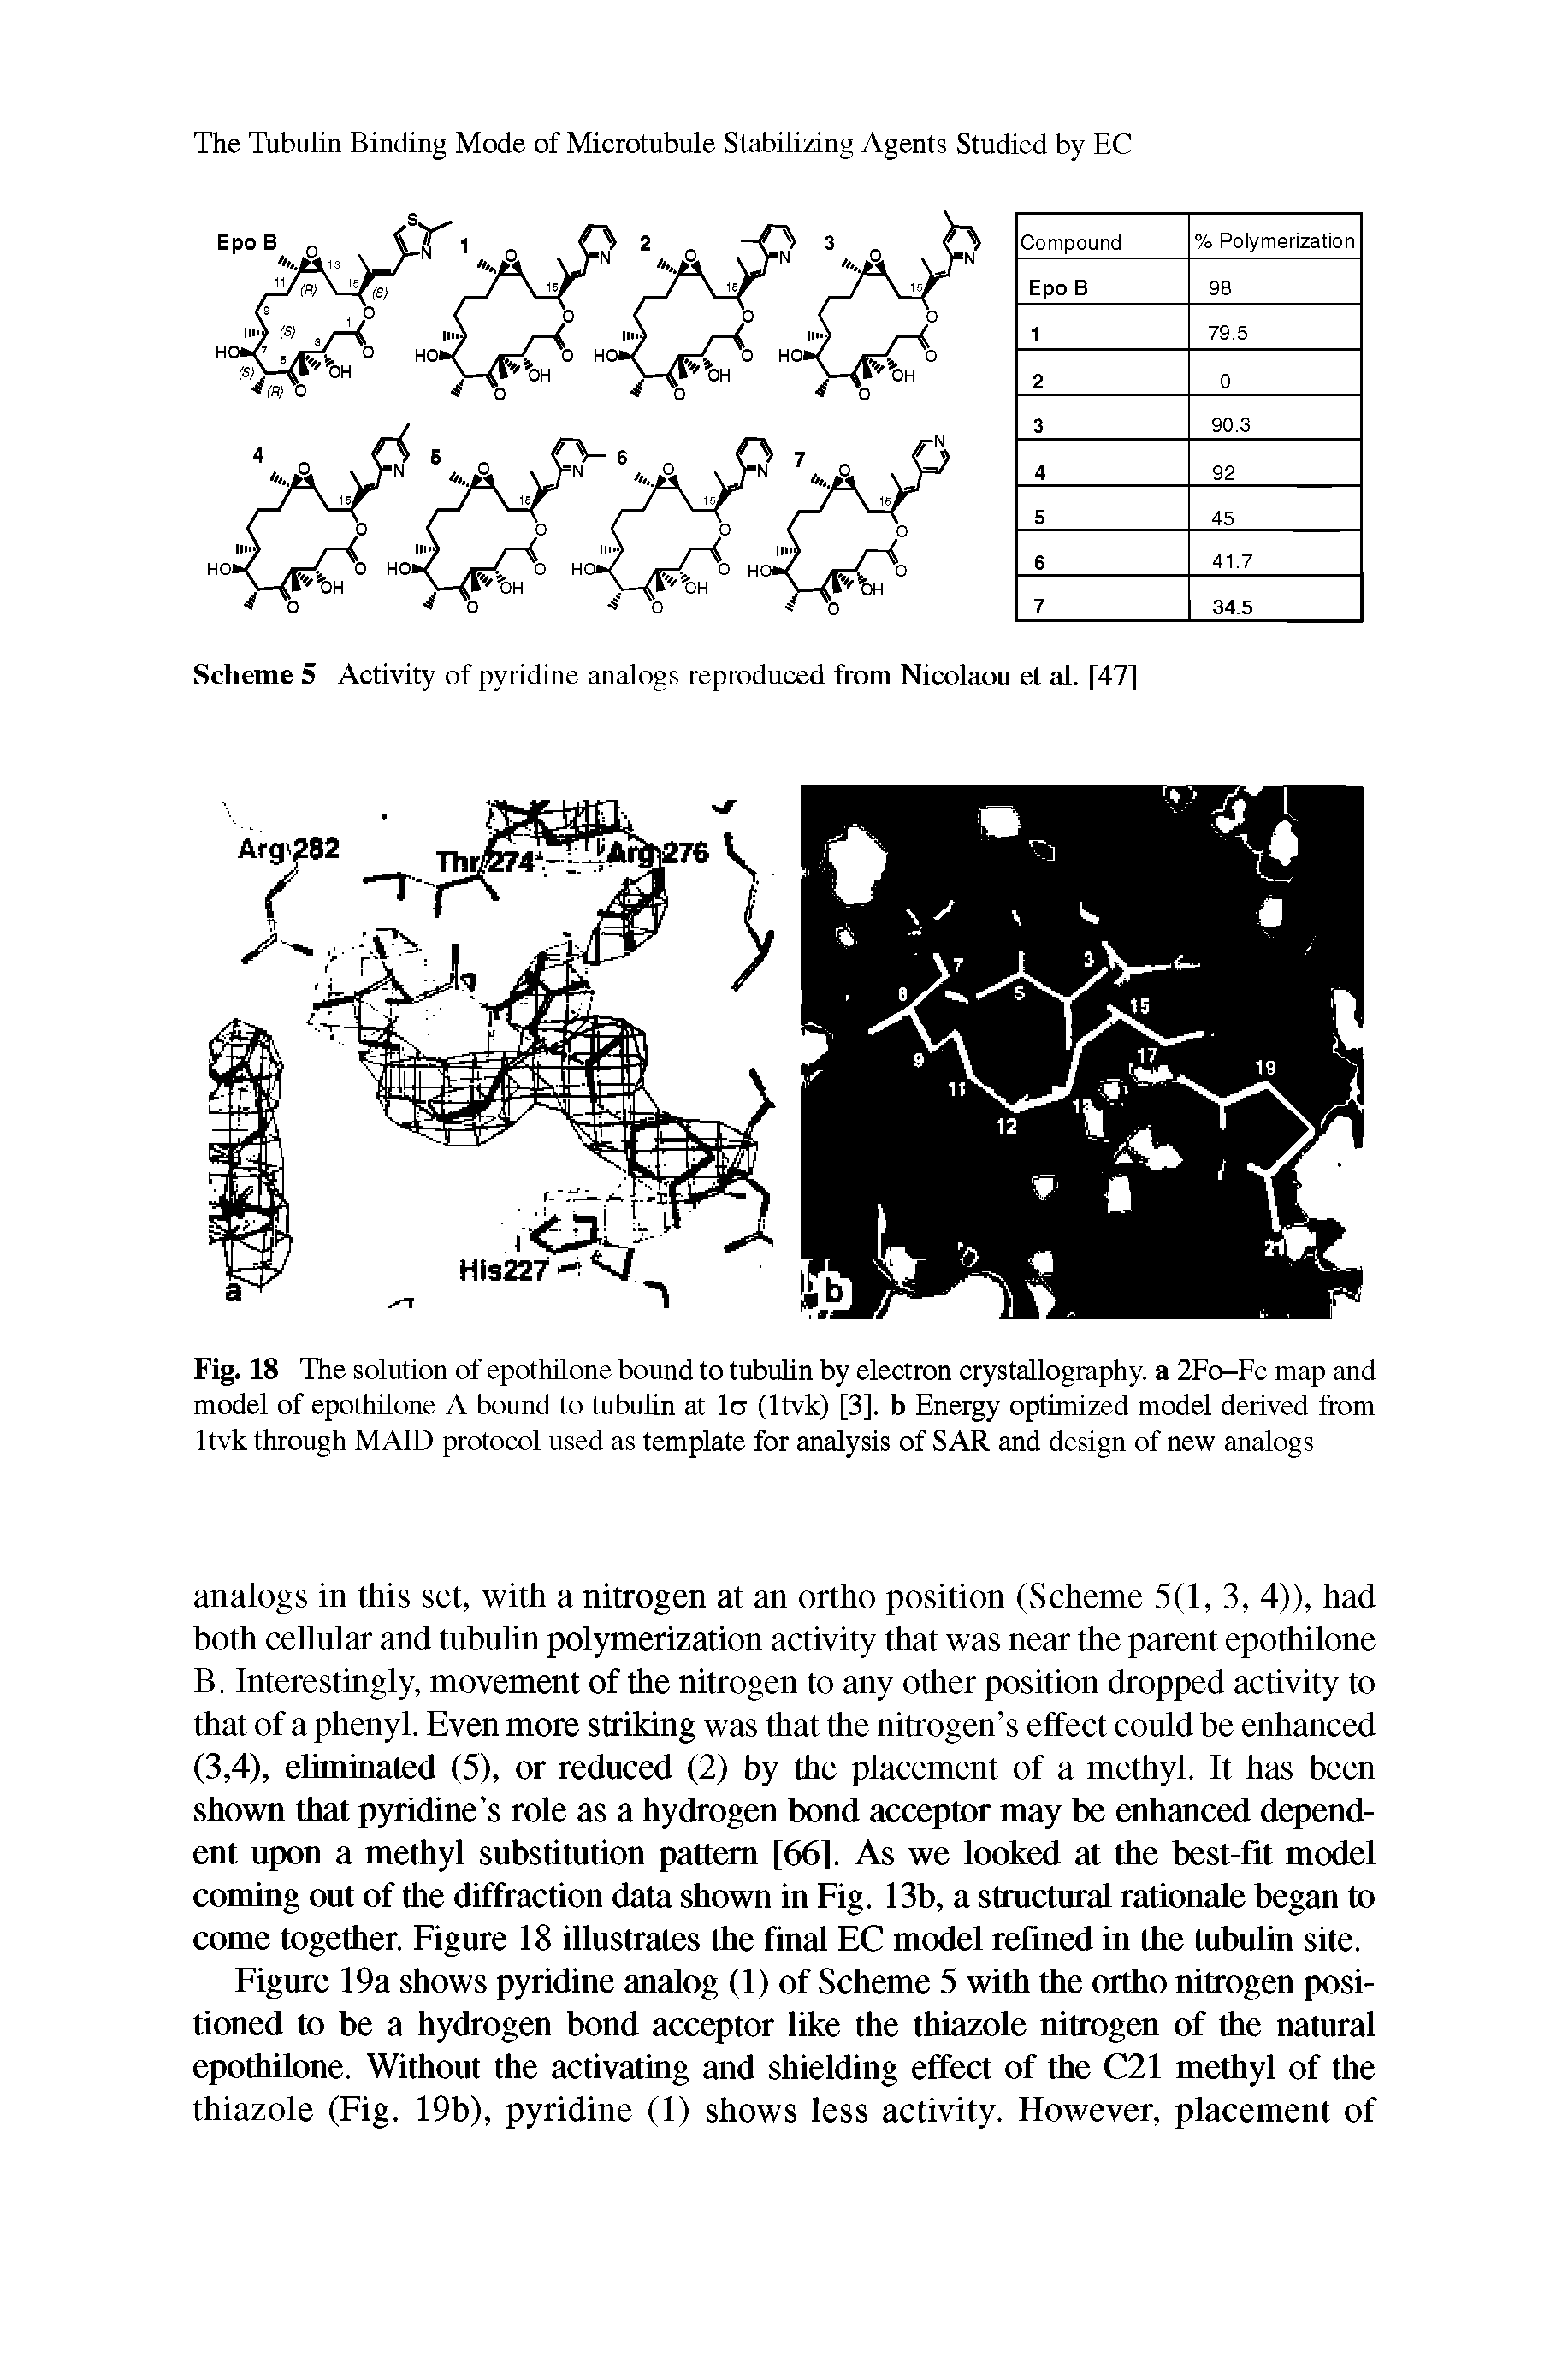 Fig. 18 The solution of epothilone bound to tubulin by electron crystallography, a 2Fo-Fc map and model of epothilone A bound to tubulin at la (ltvk) [3], b Energy optimized model derived from ltvk through MAID protocol used as template for analysis of SAR and design of new analogs...